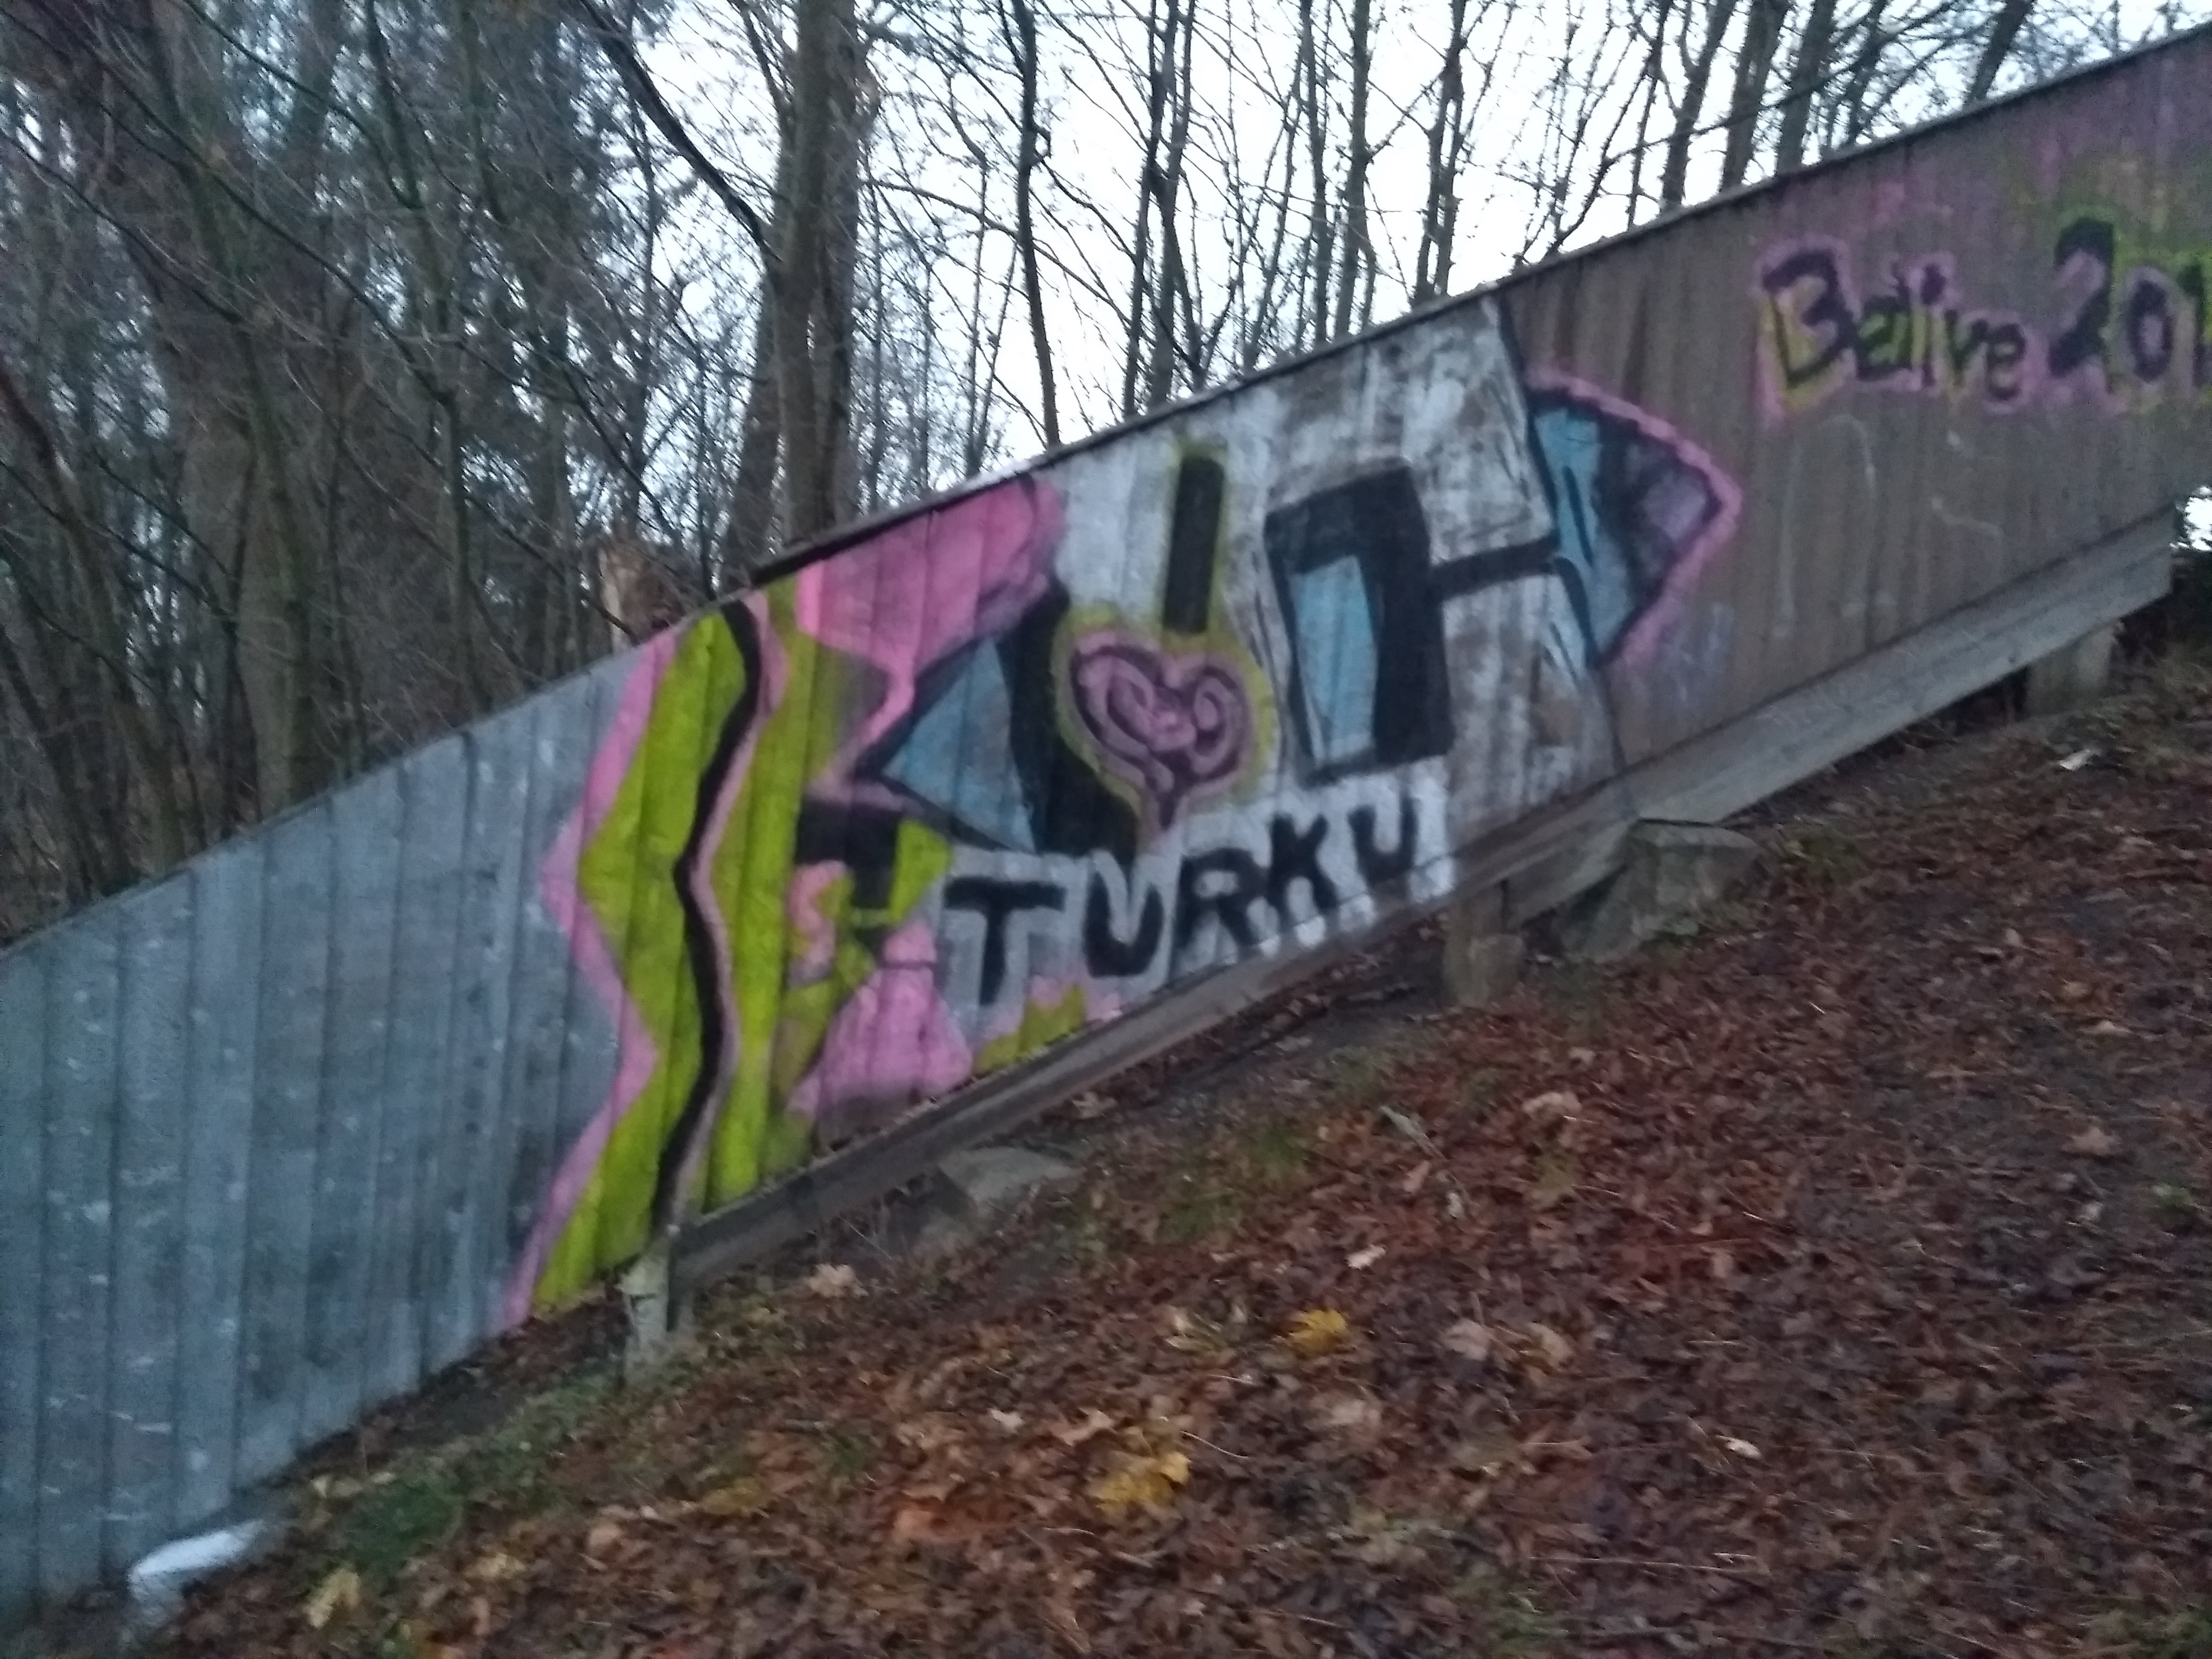 Graffito with name of the city, Turku